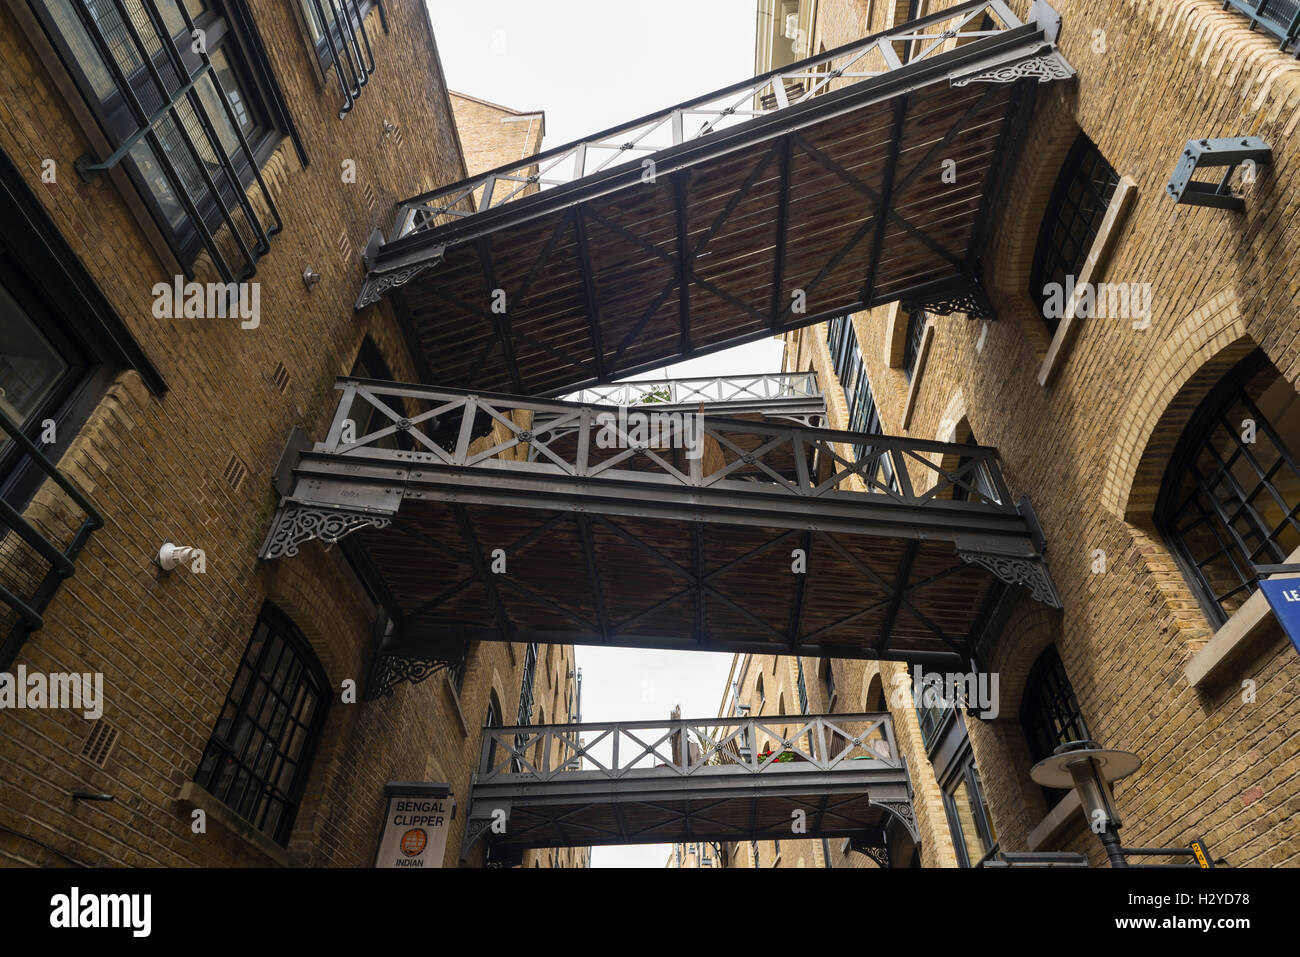 Connecting bridges over Shad Thames lane between the old Butler's Wharf warehouse building, London, UK Stock Photo